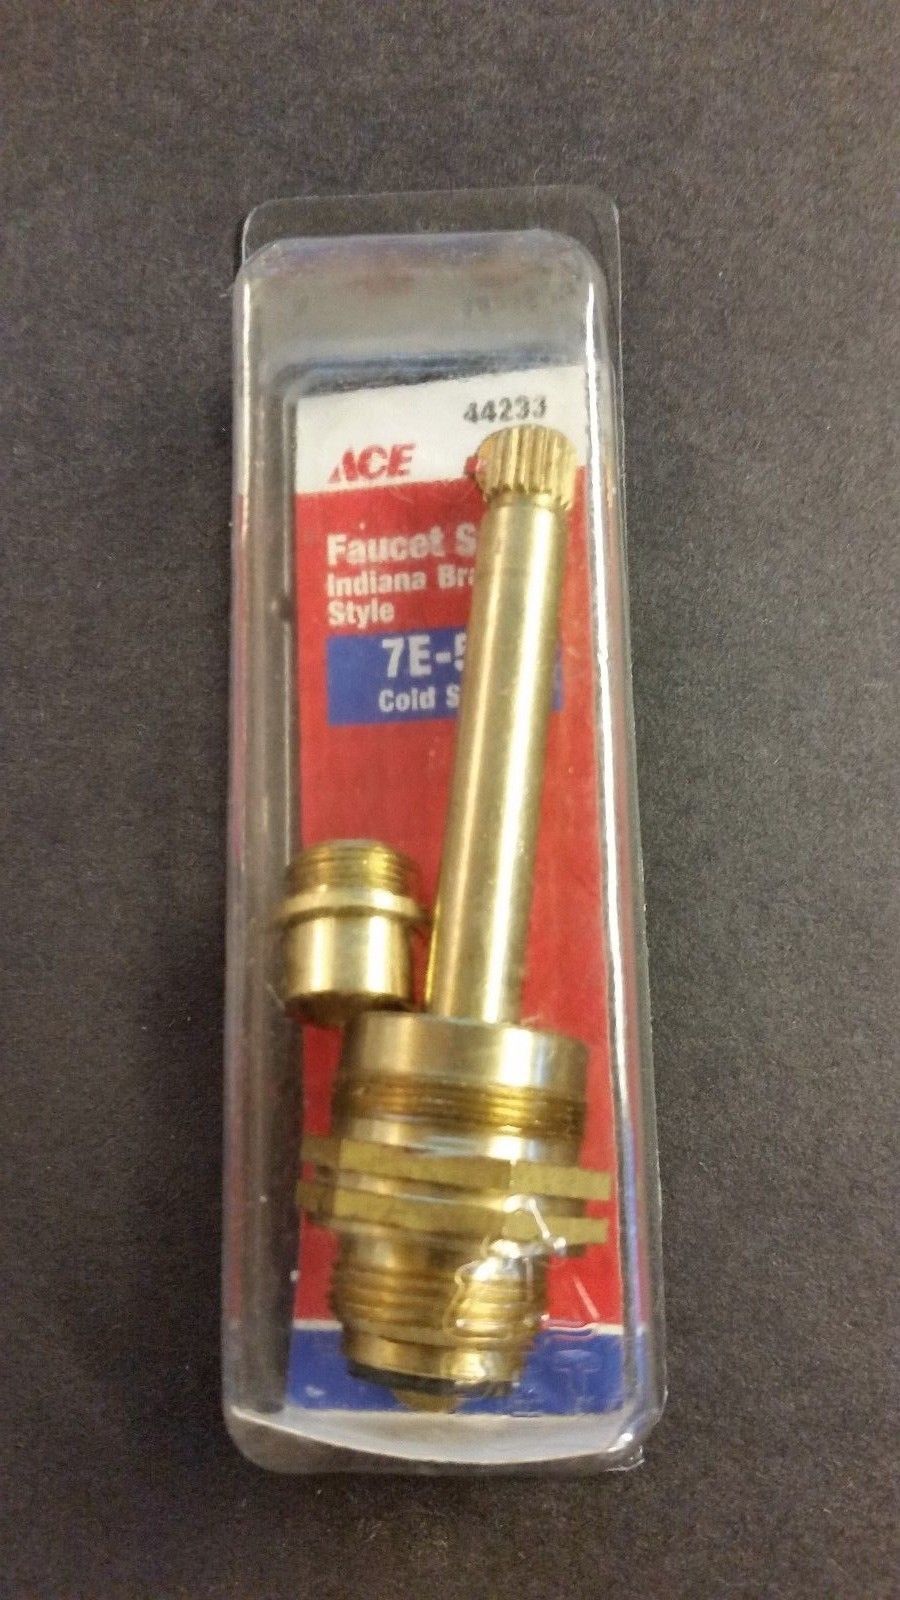 New Ace Hardware 7e 5 C Faucet Repair Cold And 20 Similar Items